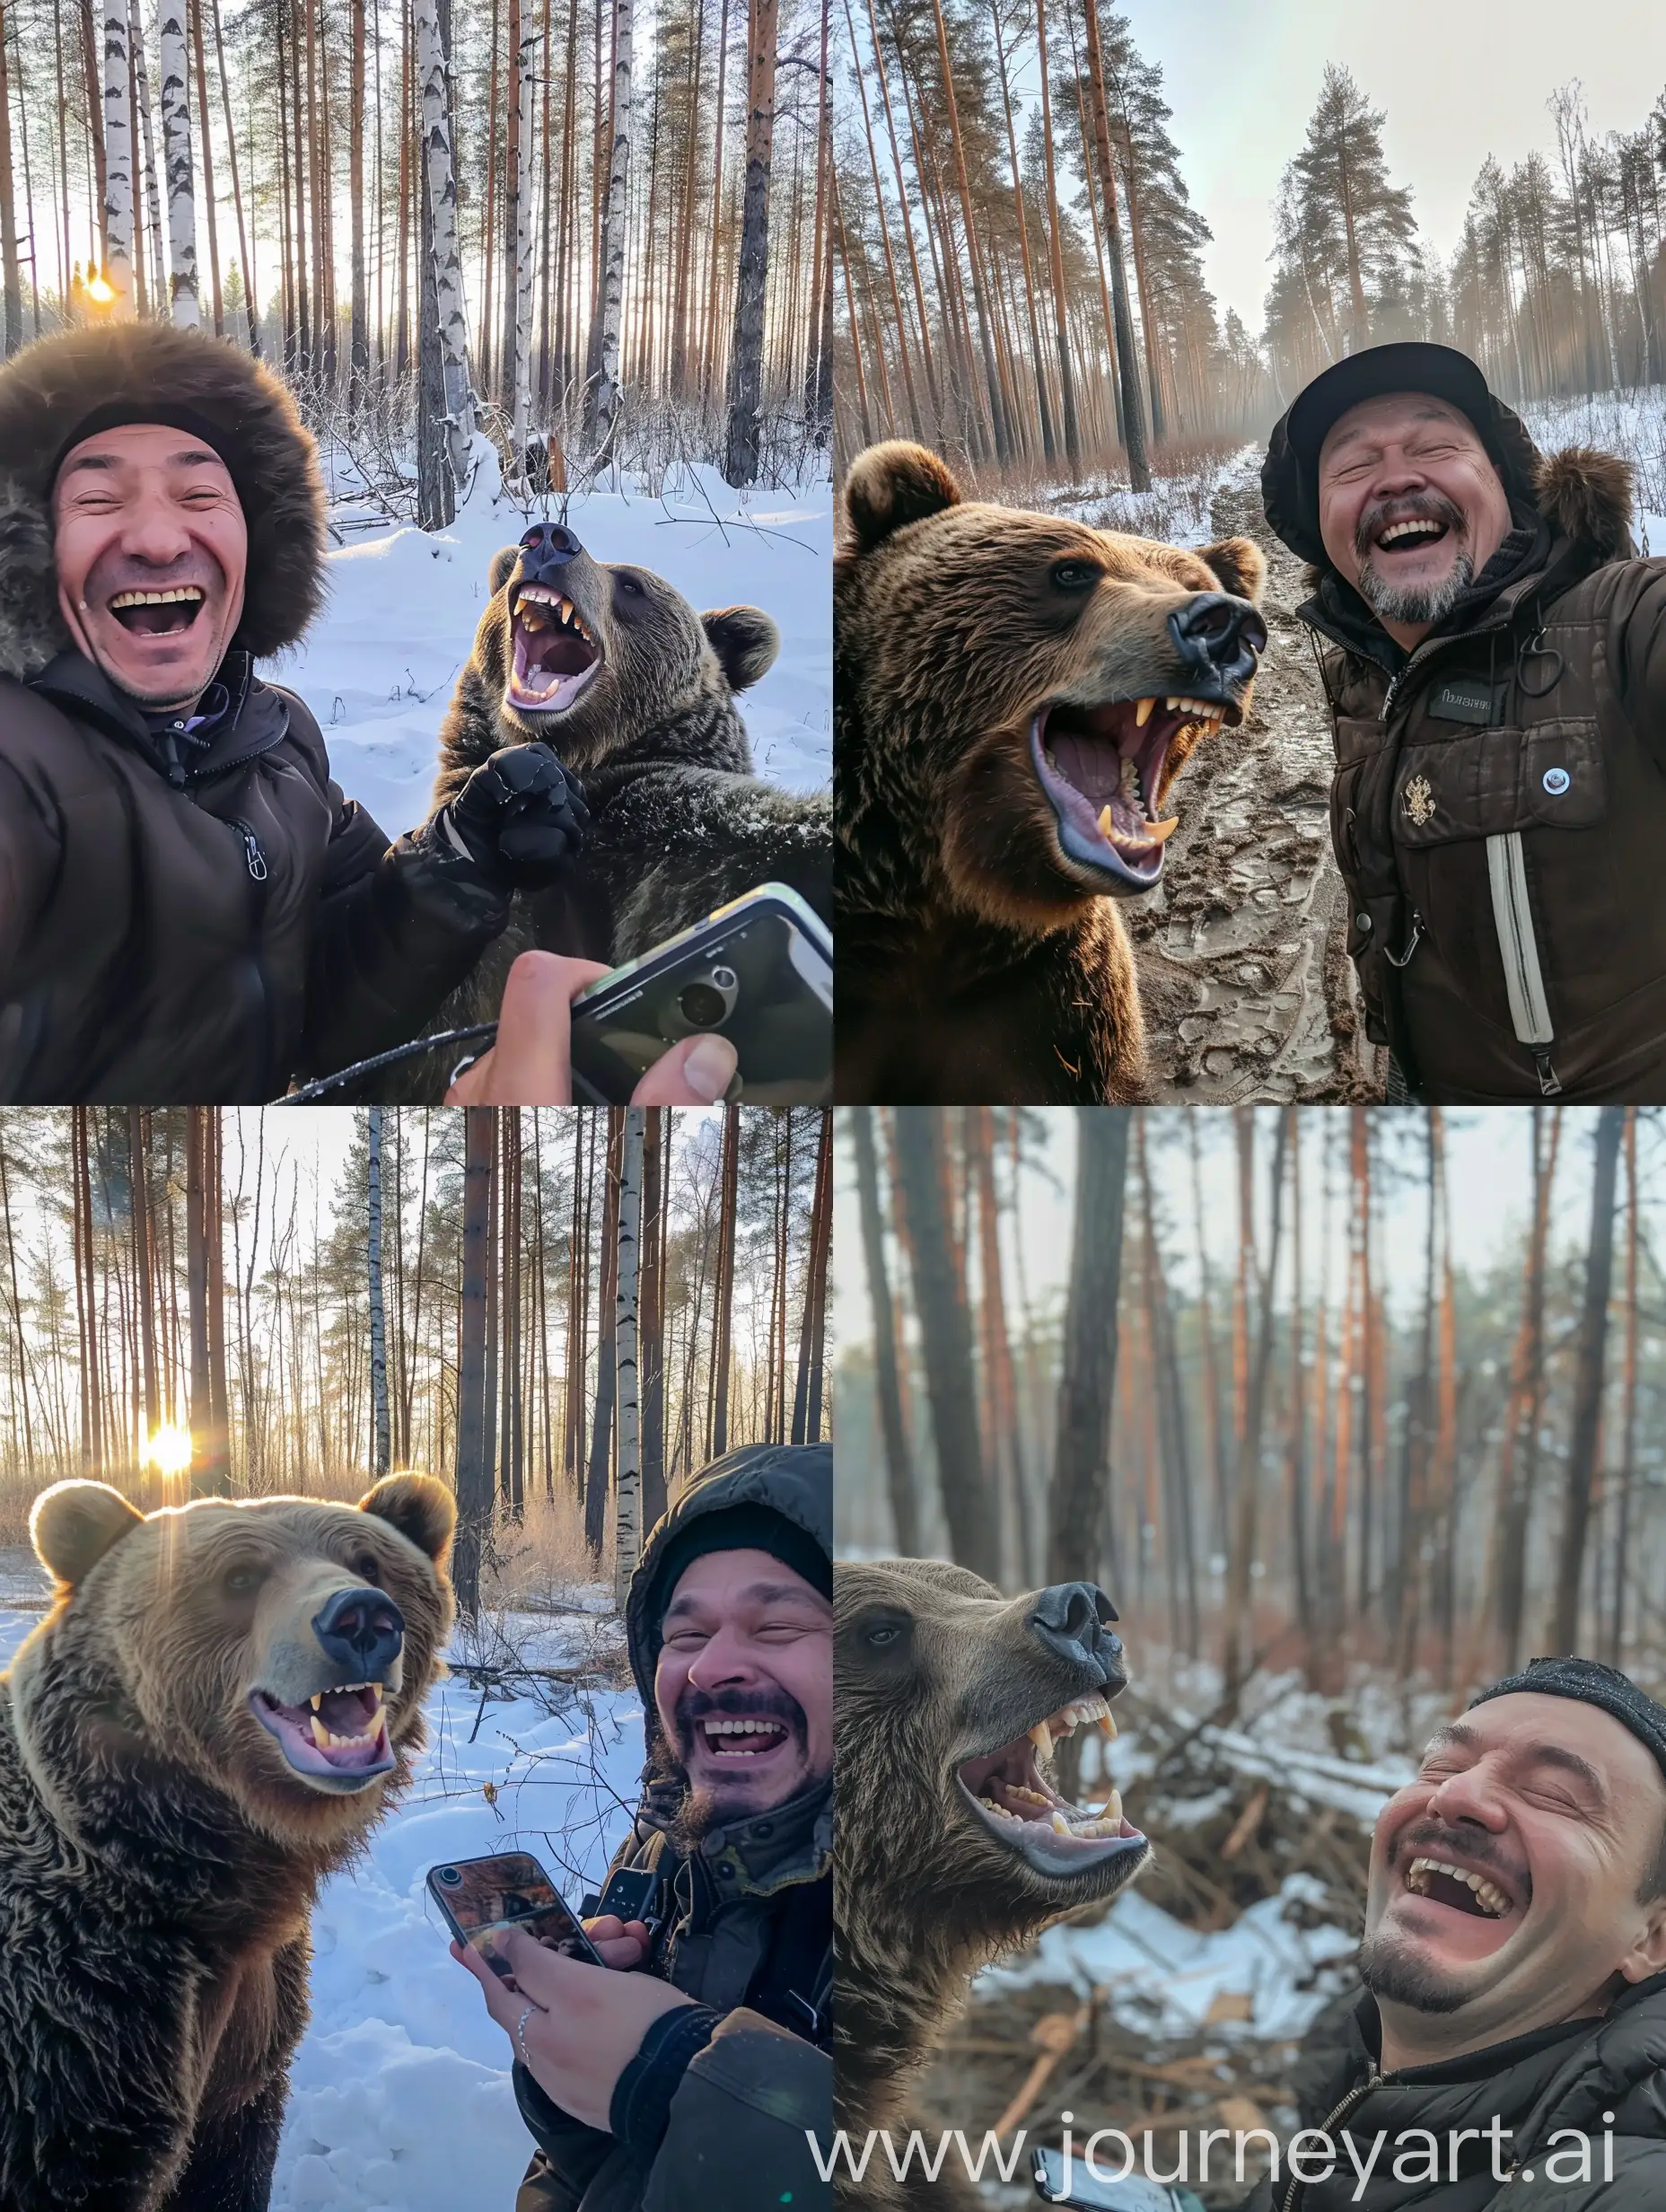 selfie on iPhone pov, a bear and a Russian man laughing, against the background of forest, taiga, morning, winter